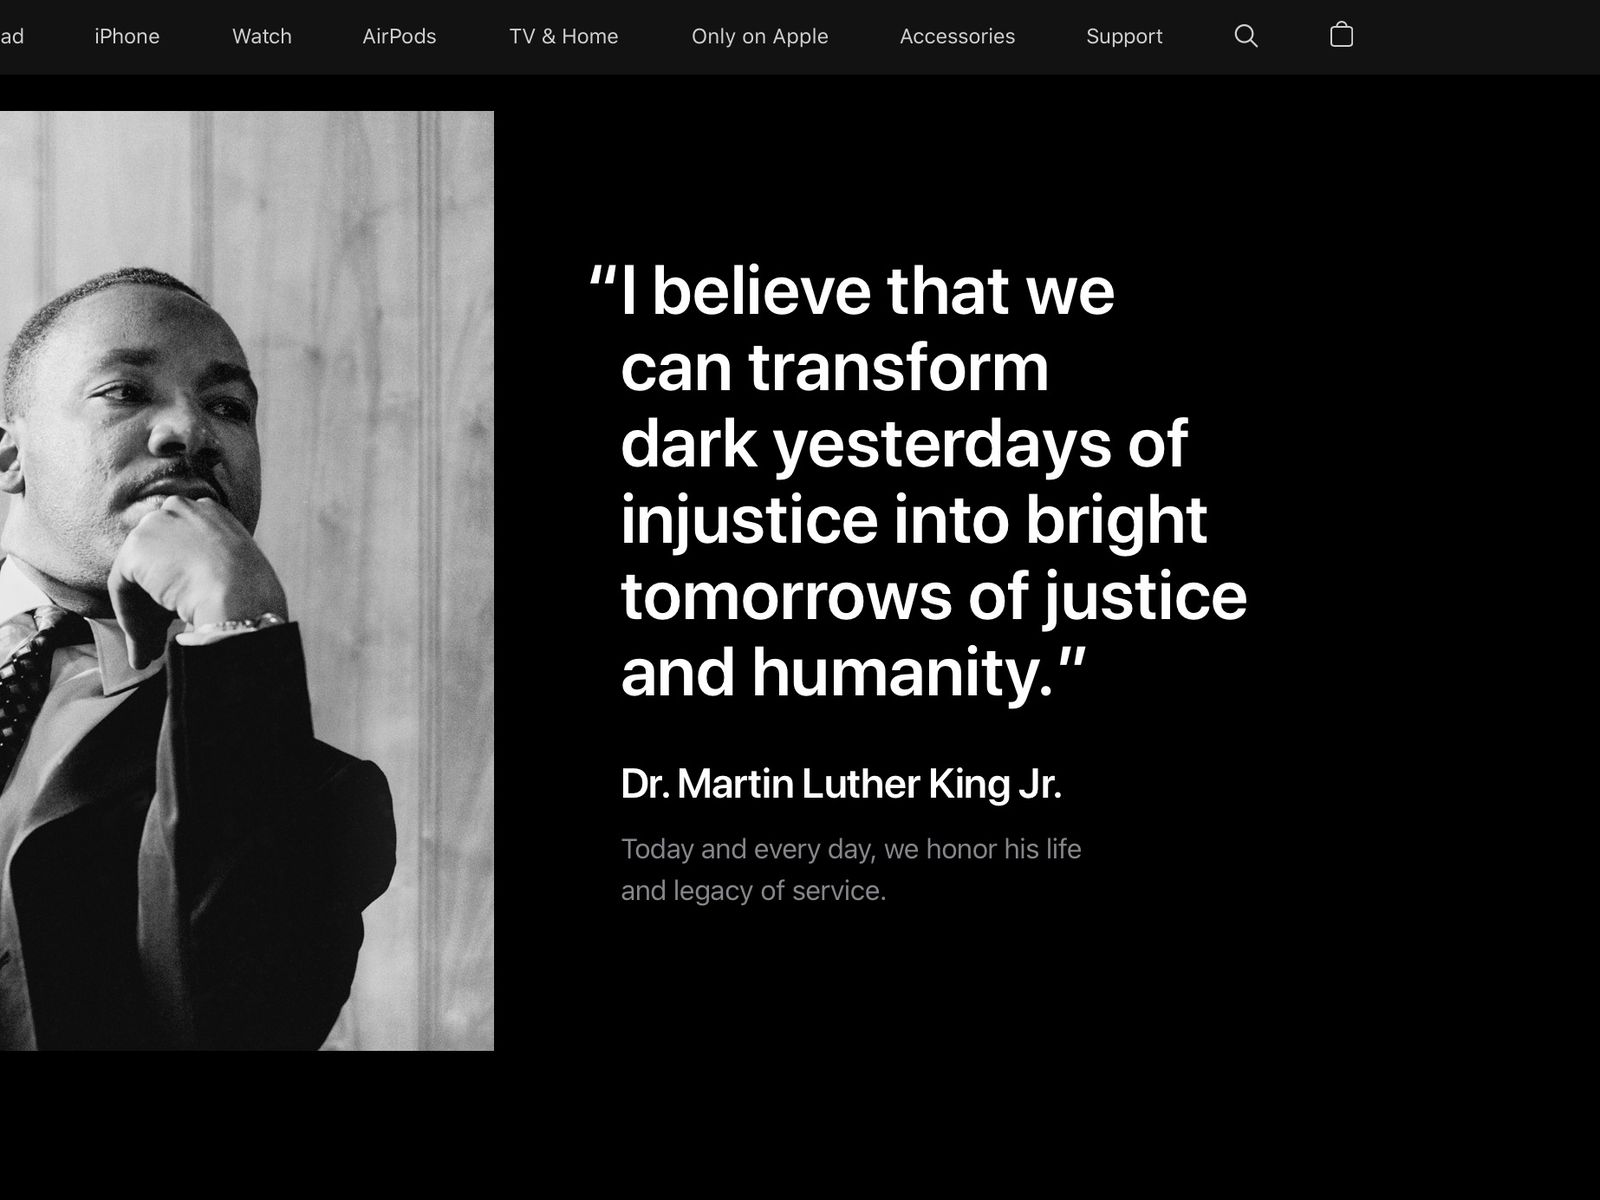 Apple's Web site features Martin Luther King Jr. ebook - Apple